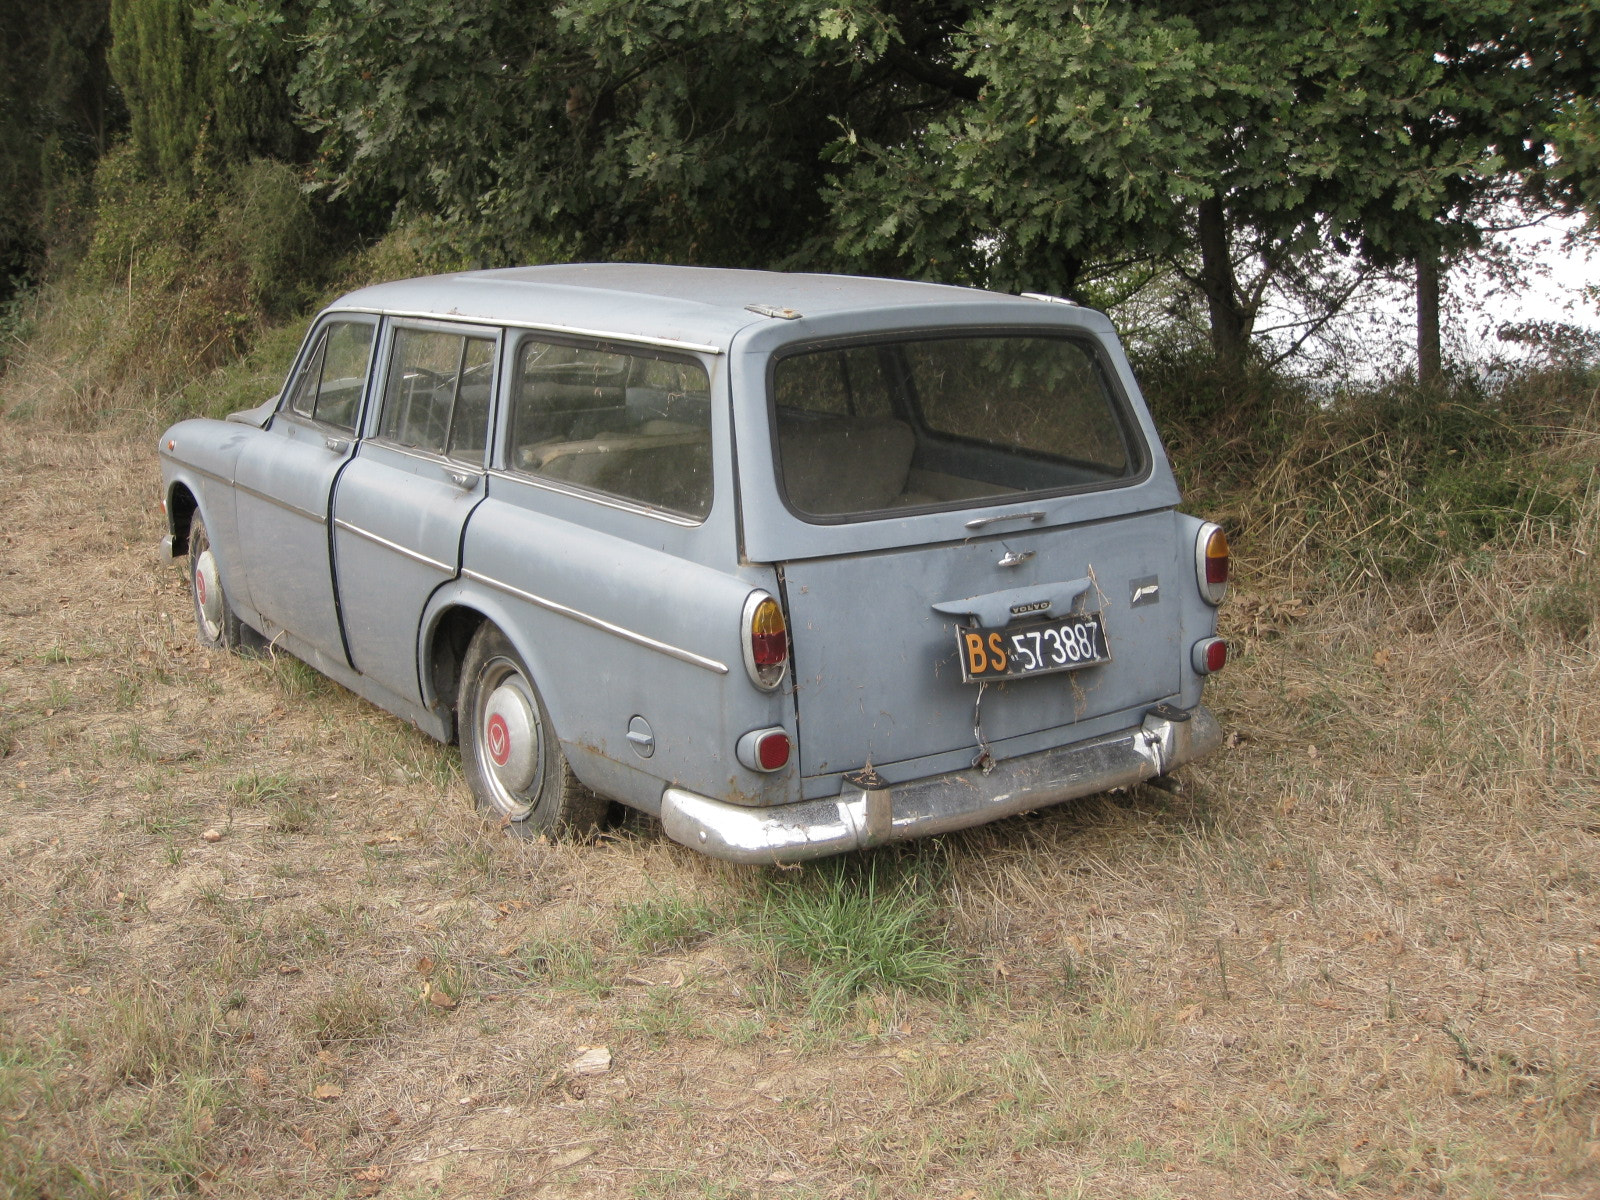 Canon PowerShot SD890 IS (Digital IXUS 970 IS / IXY Digital 820 IS) sample photo. Lost volvo in tuscany 1 photography